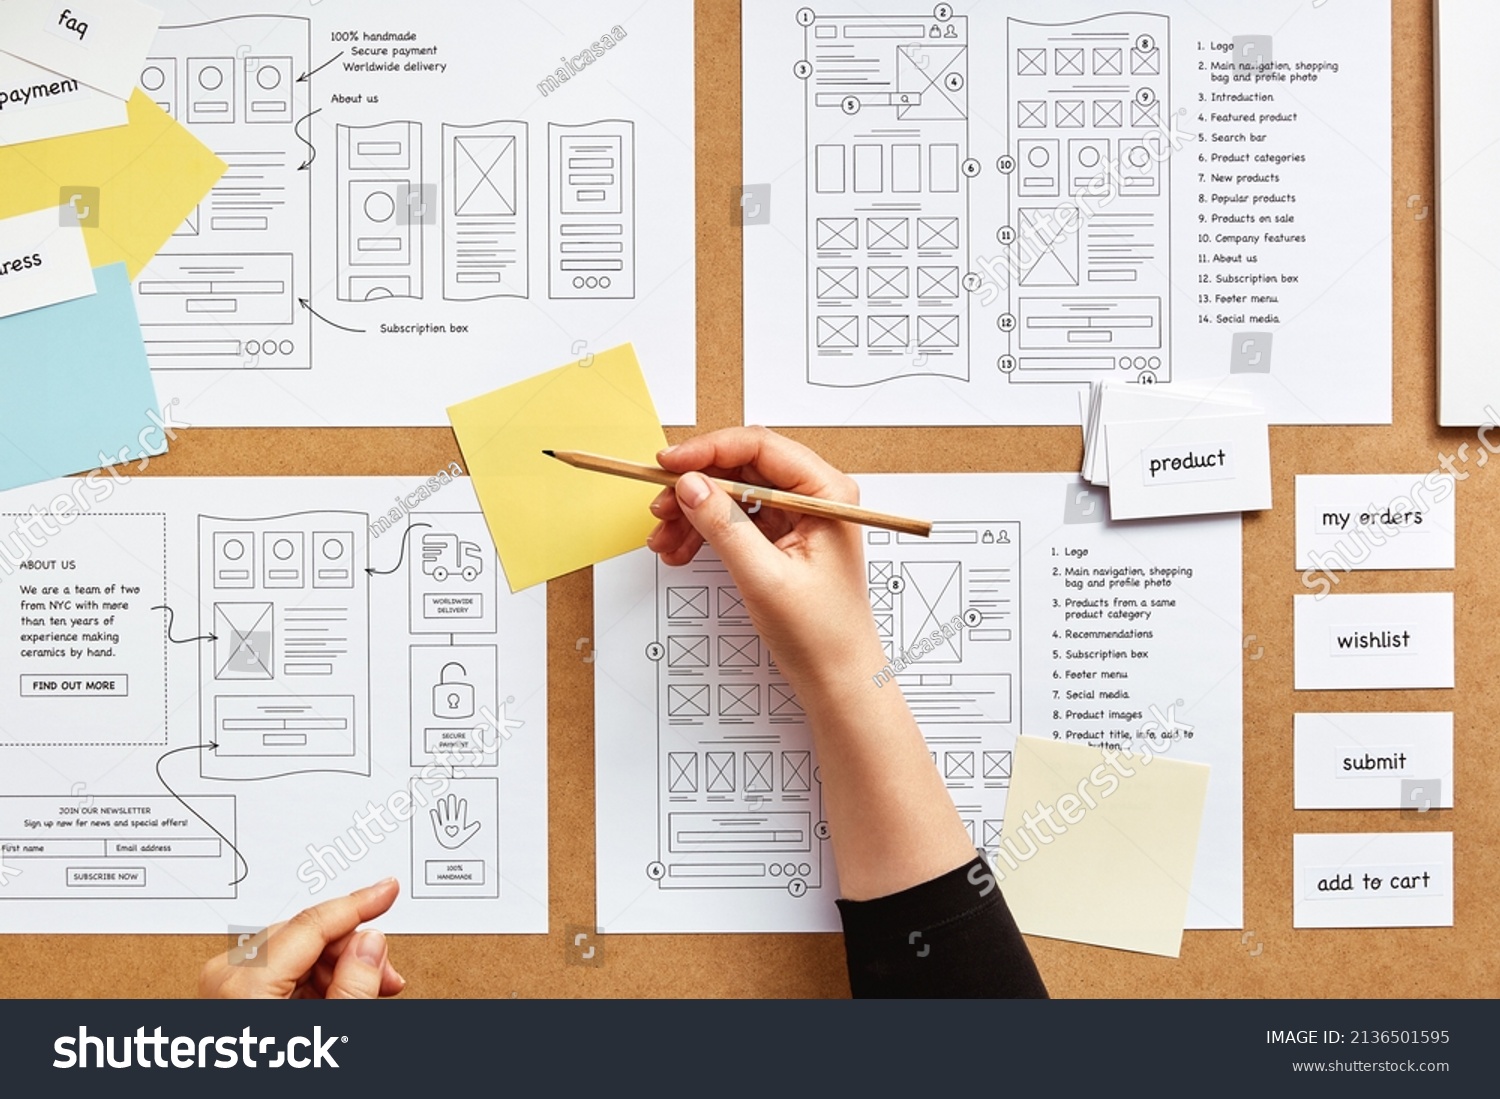 Web UX designer working on mobile responsive website project. Flat lay image of numerous website wireframe sketches and card sorting technique over product designer desk.  #2136501595